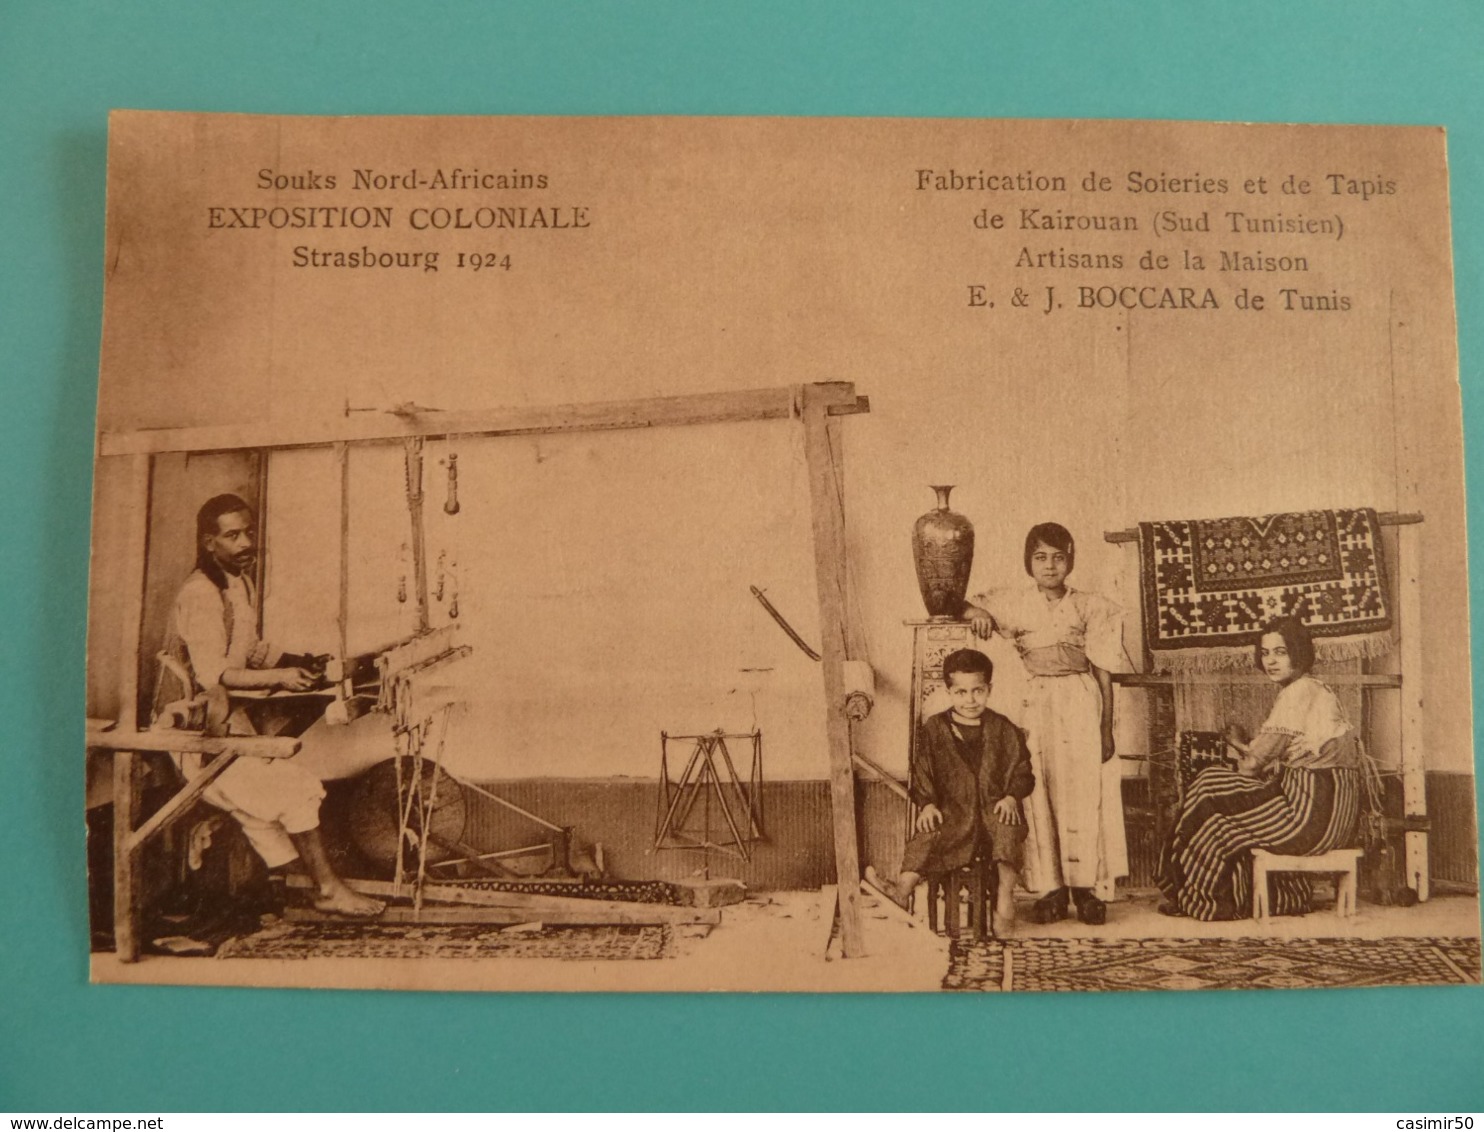 EXPOSITION COLONIALE STRASBOURG 1924 SOUKS NORD AFRICAINS - Exposiciones